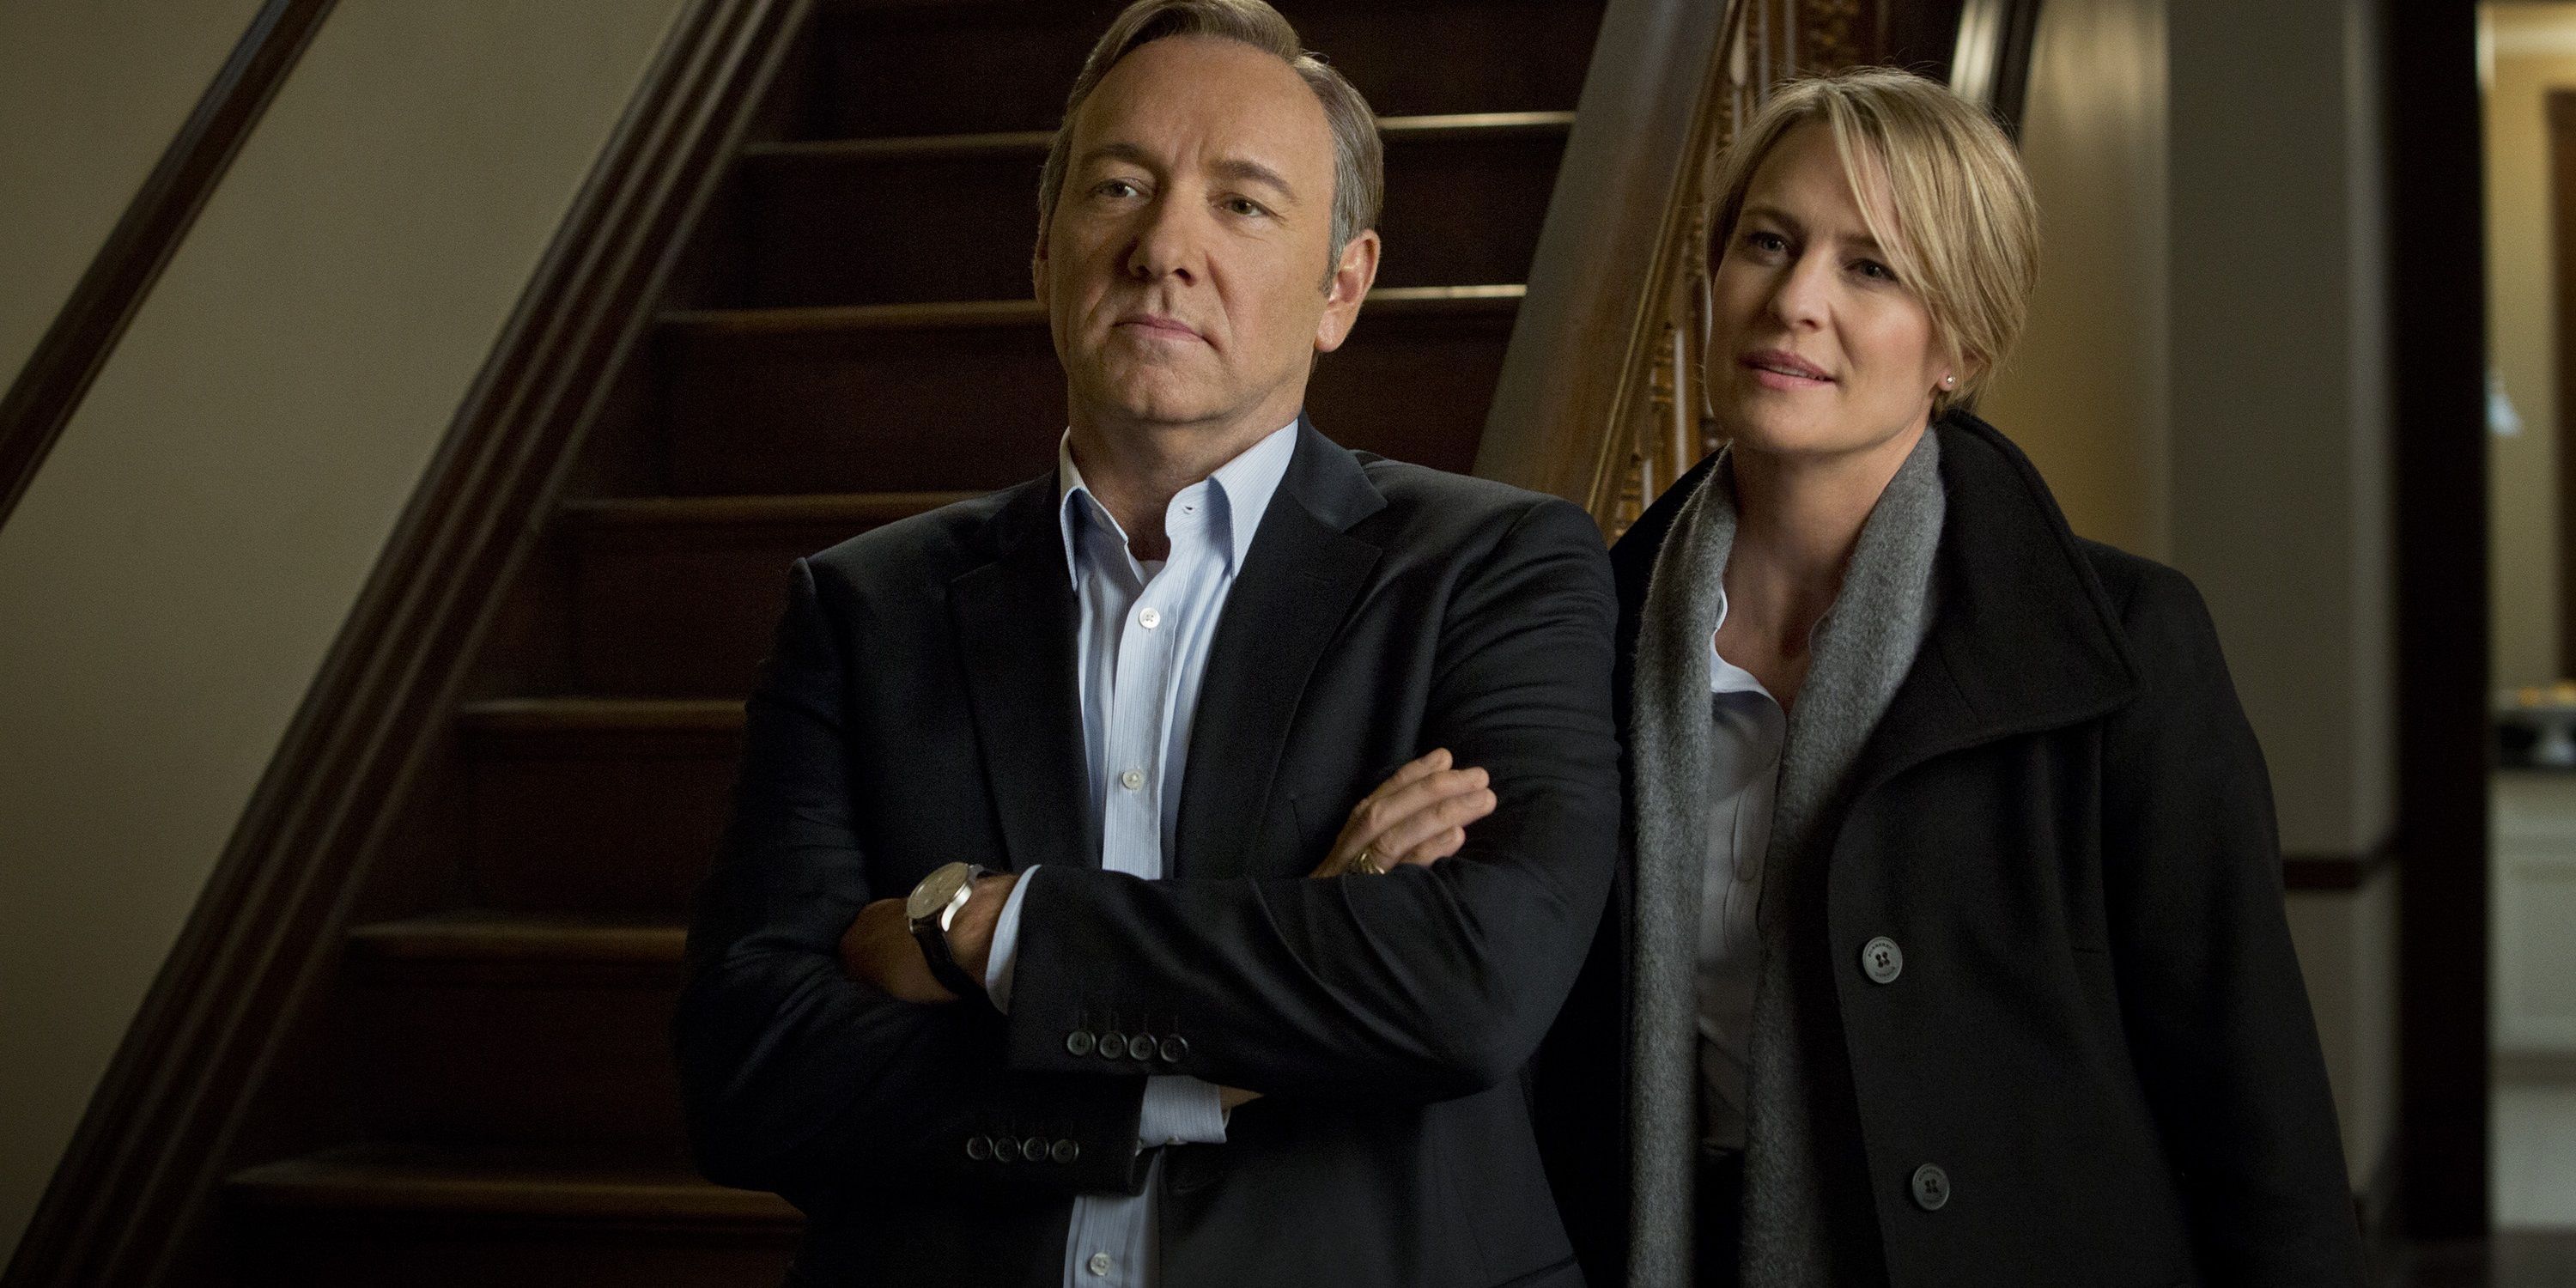 Kevin Spacey as Frank Underwood, and Robin Wright as his wife Claire Underwood on House of Cards